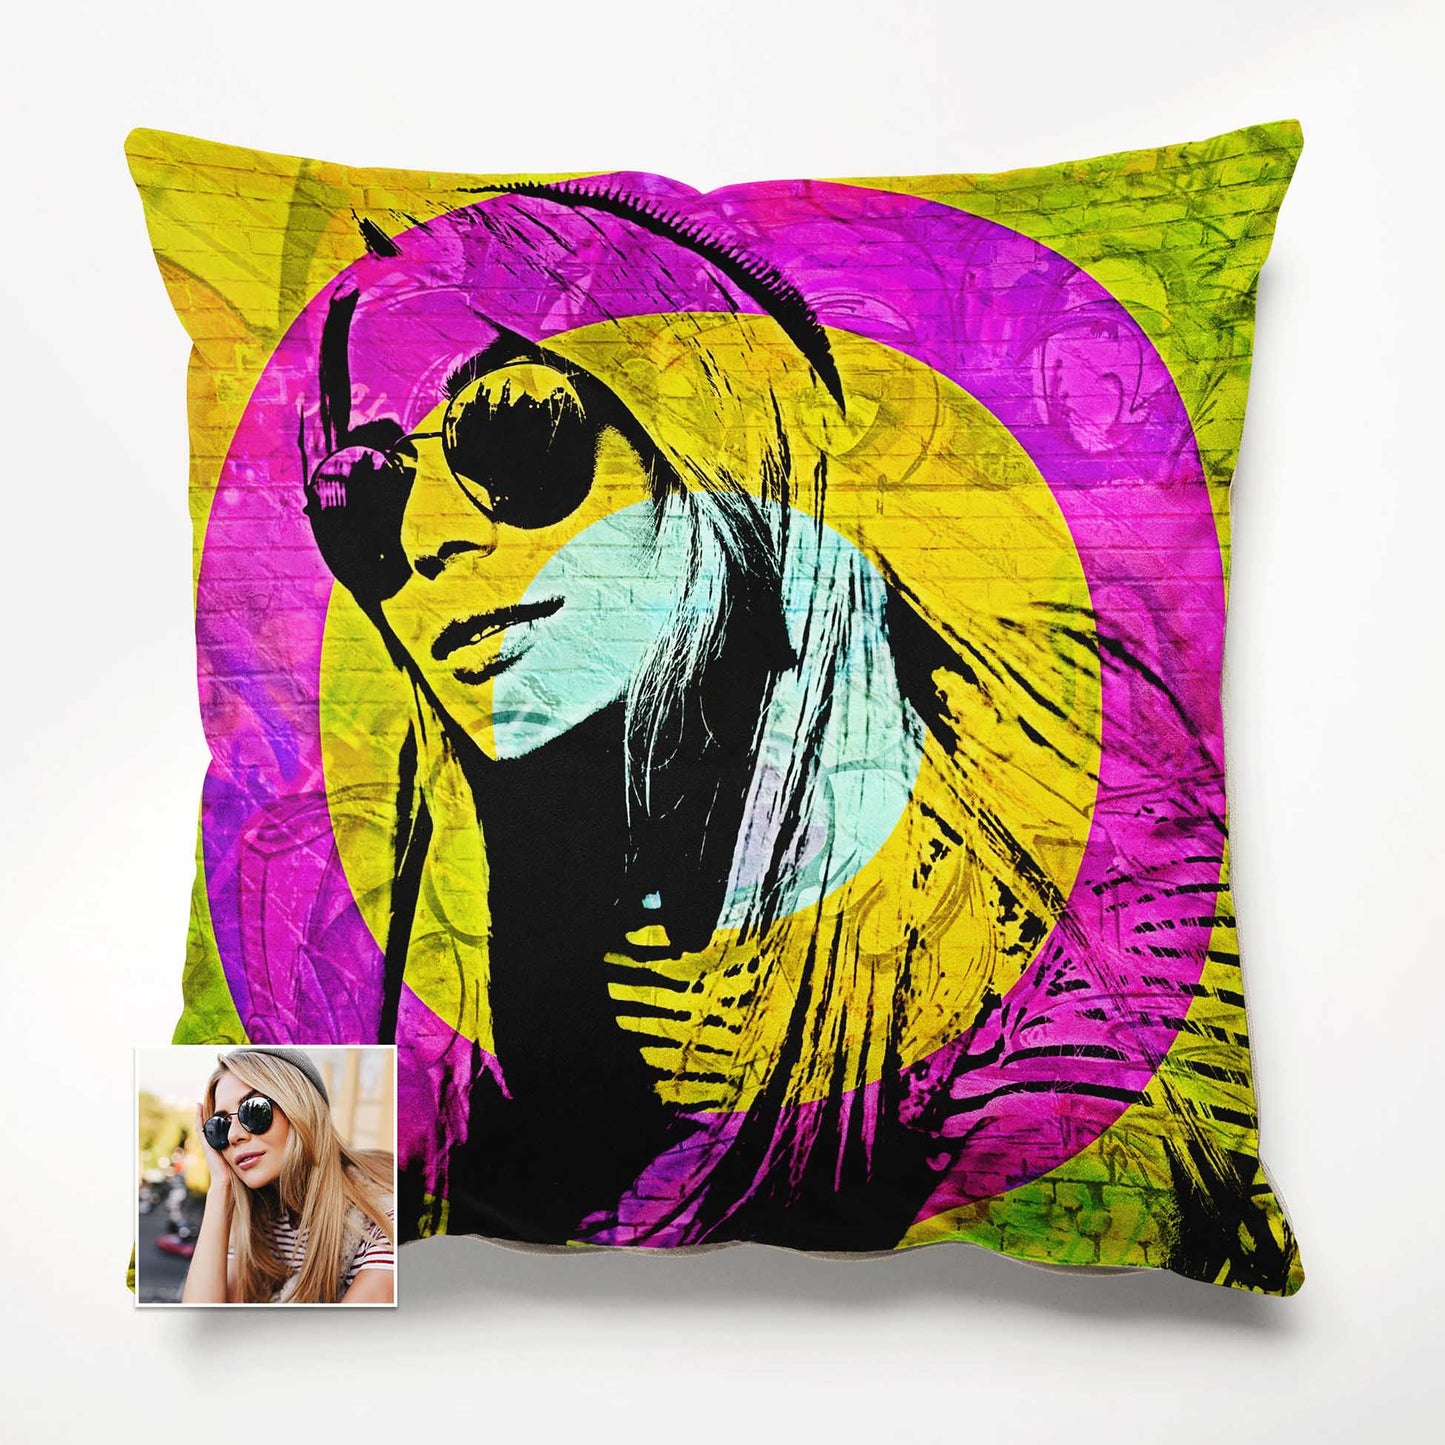 Elevate your home decor with the Personalised Graffiti Street Art Cushion, a true expression of creativity and originality. With its vivid and colorful print from your photo, this cushion brings the urban energy of street art indoors